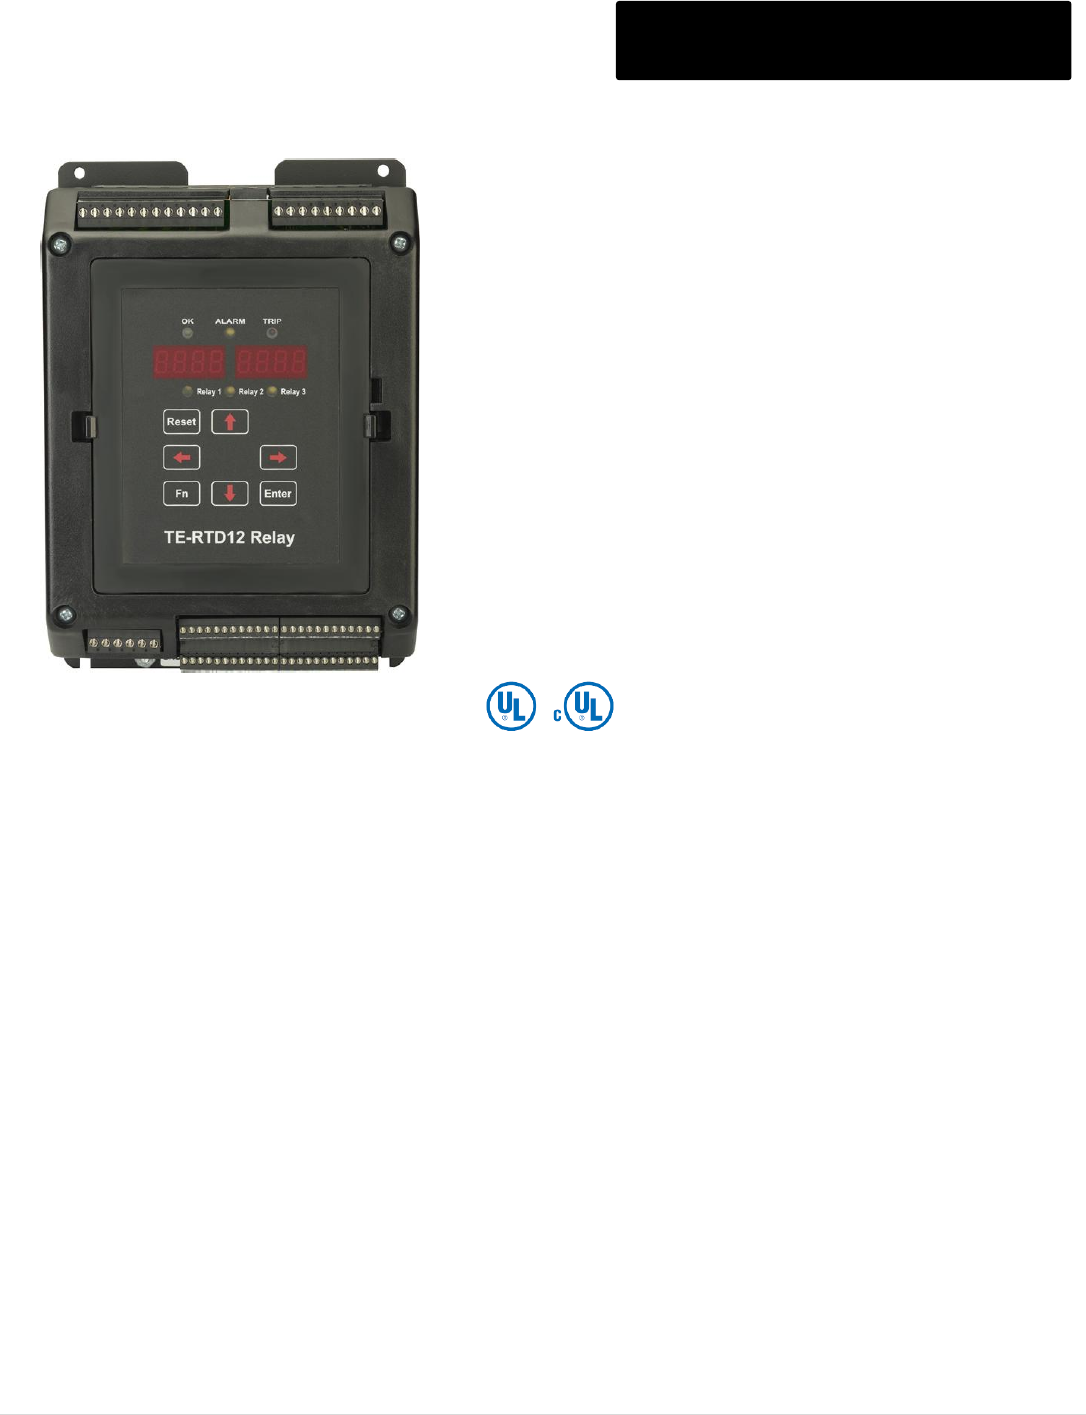 Arrester Device DFY-5 LCD Display Under Over Voltage Phase Sequence Protector 3 Phase Voltage Monitor Relay Really Good Quality Products,Not A Pile of Garbage 